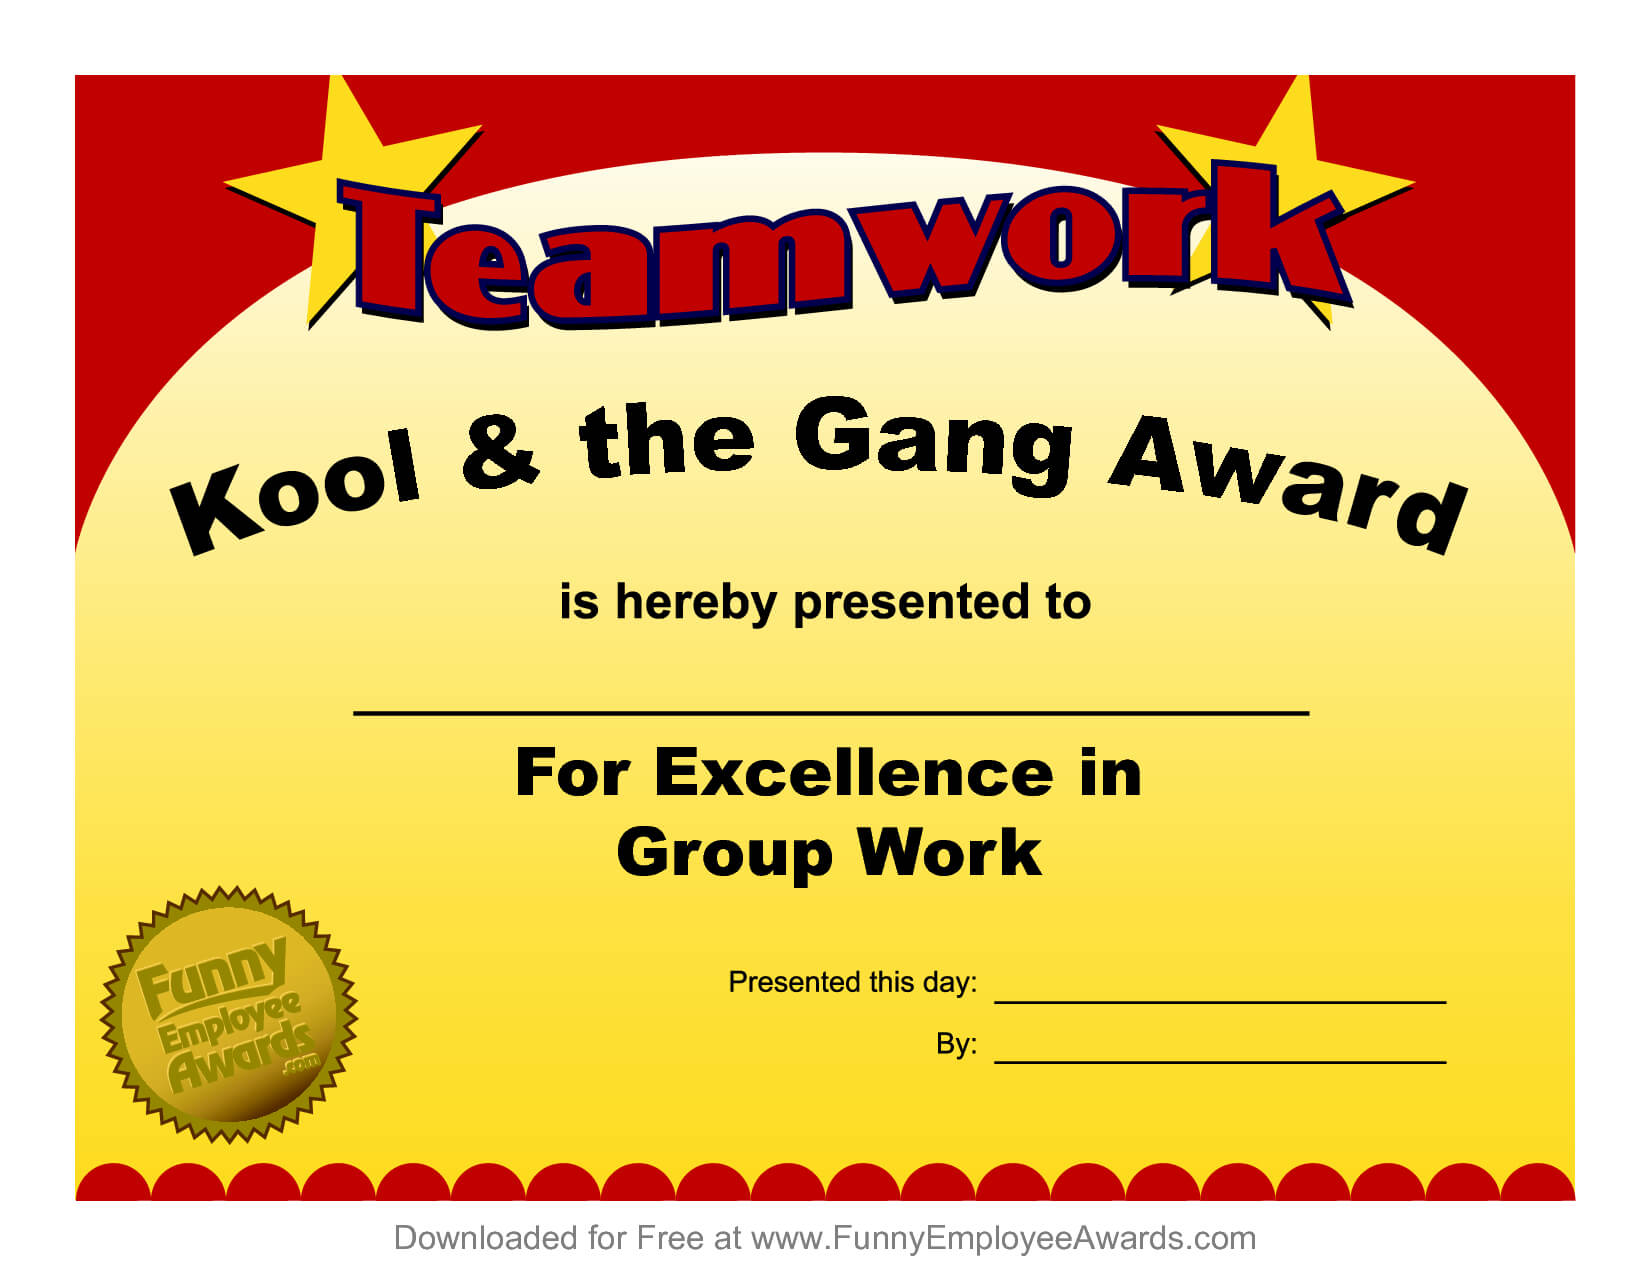 Fun Award Templatefree Employee Award Certificate Templates Intended For Free Printable Funny Certificate Templates